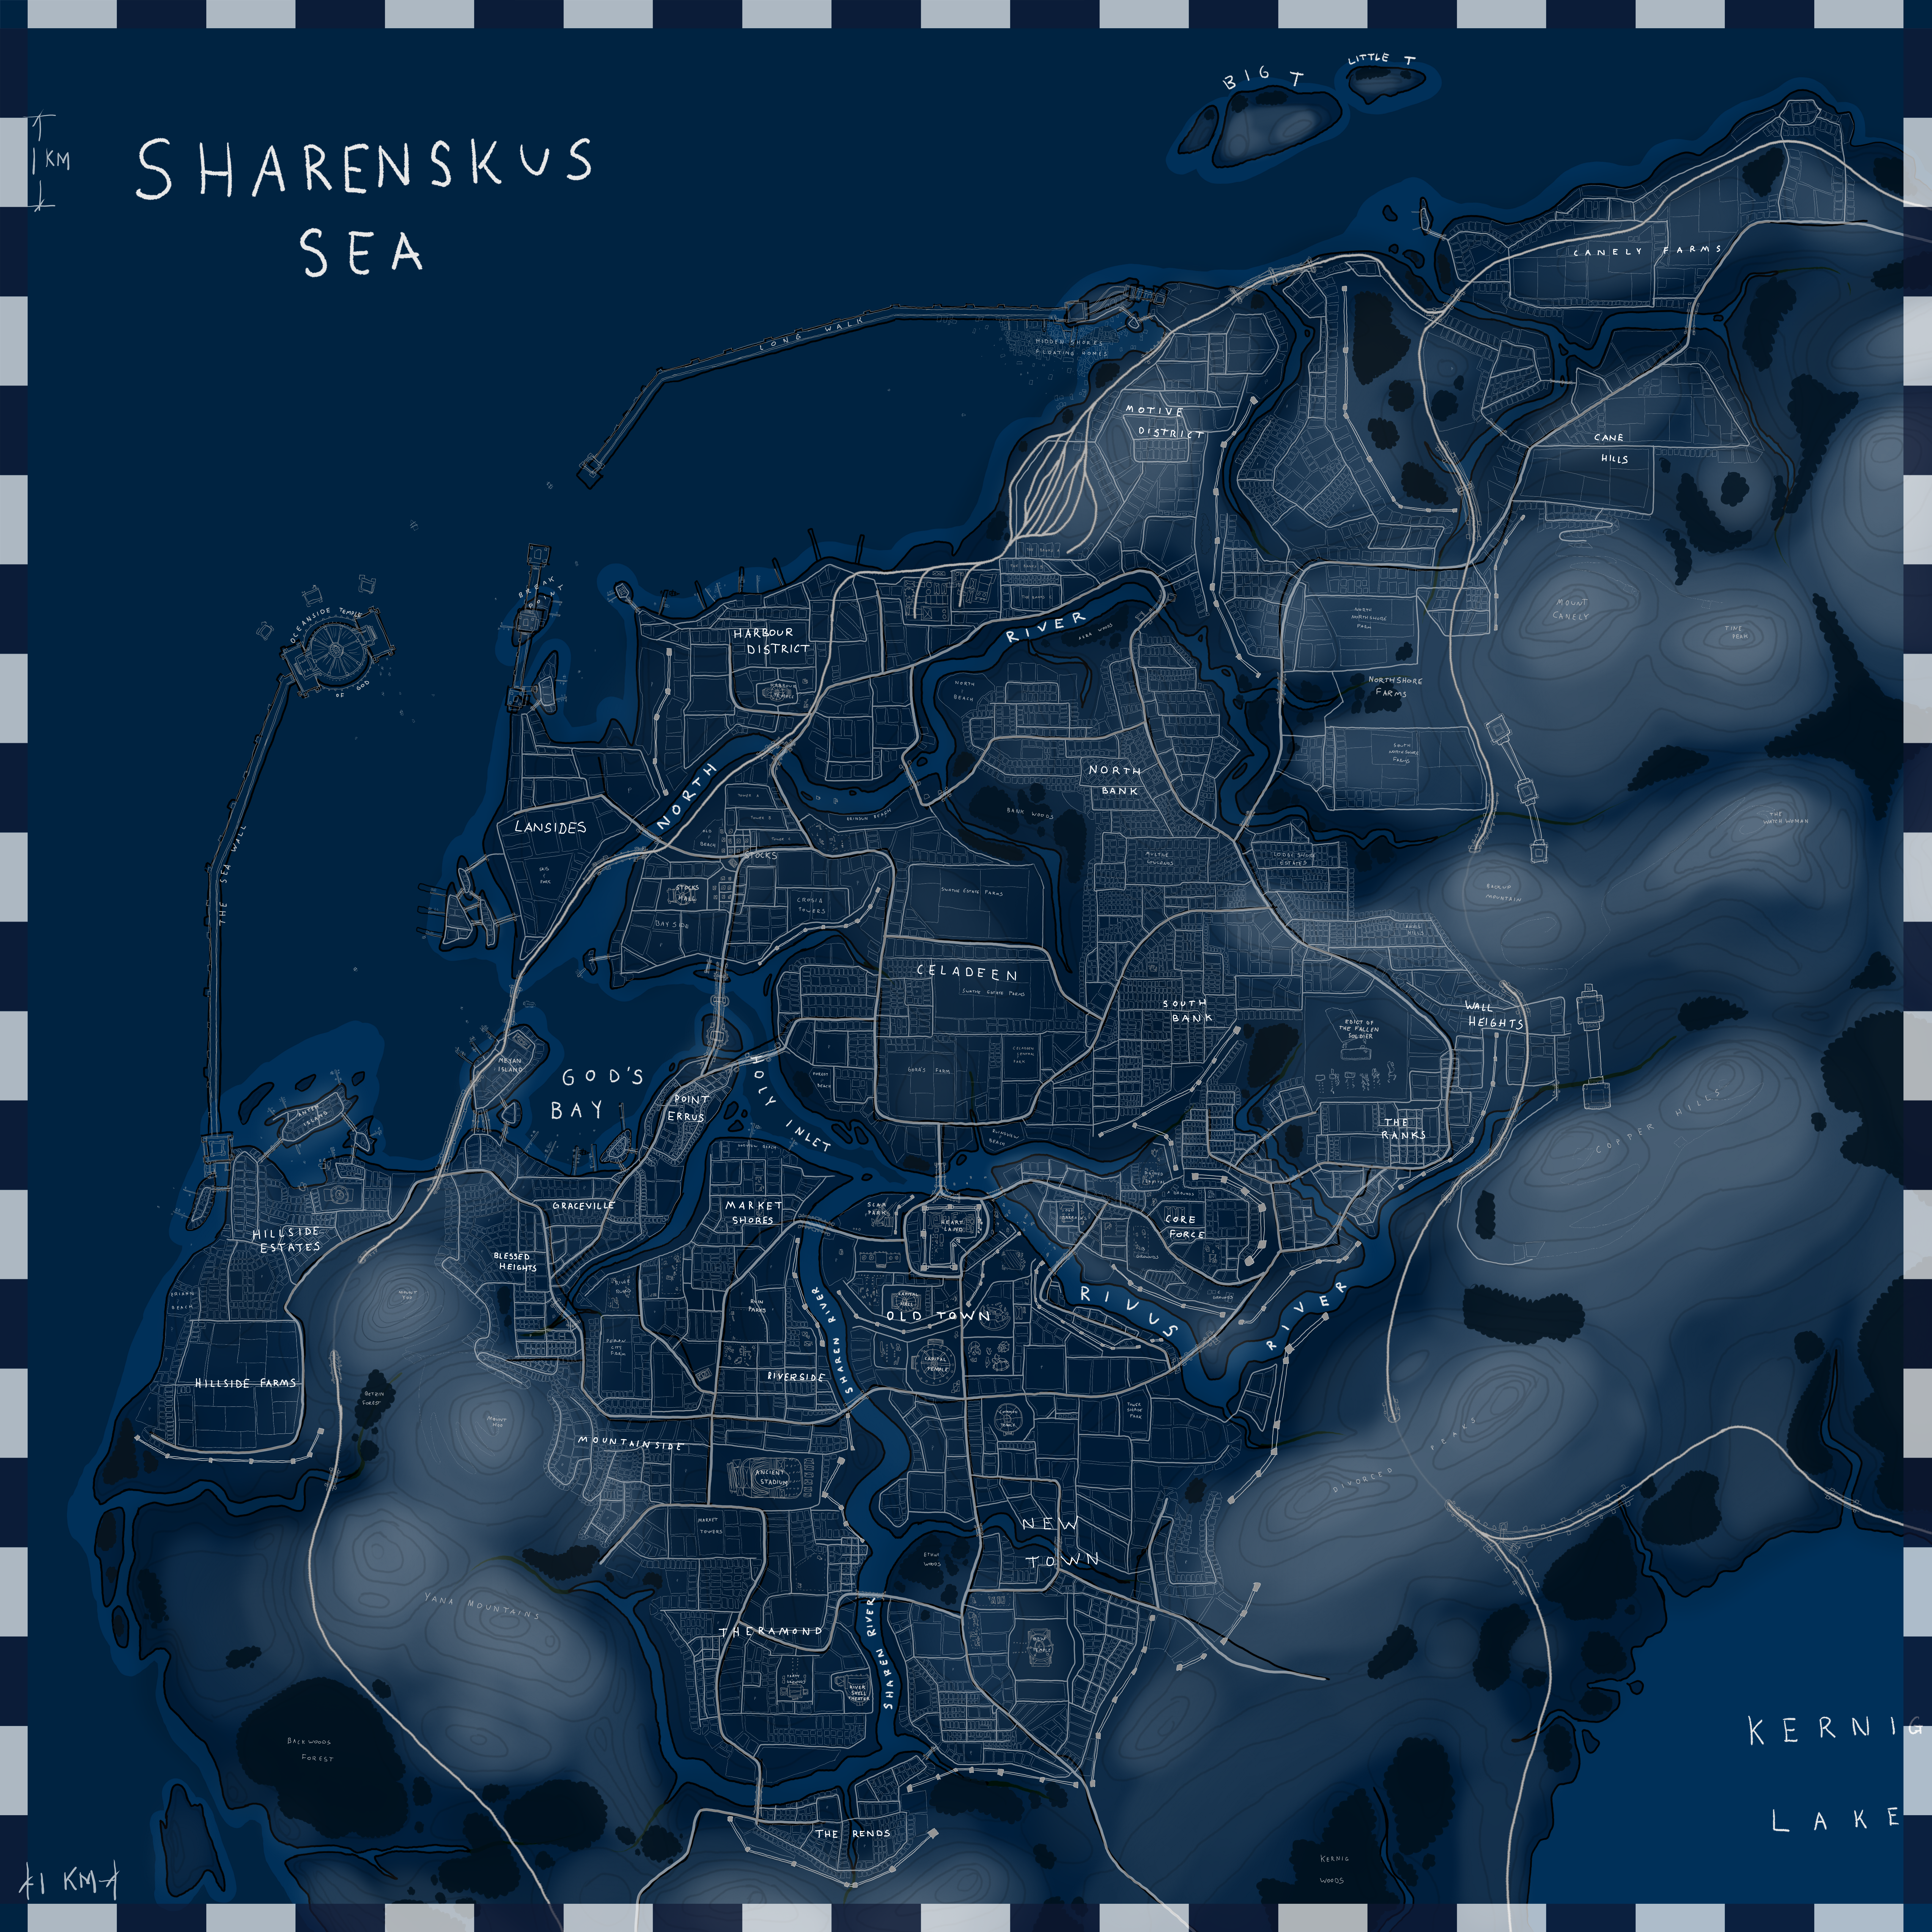 Blueprints for the Coastal City-State of Russin cover